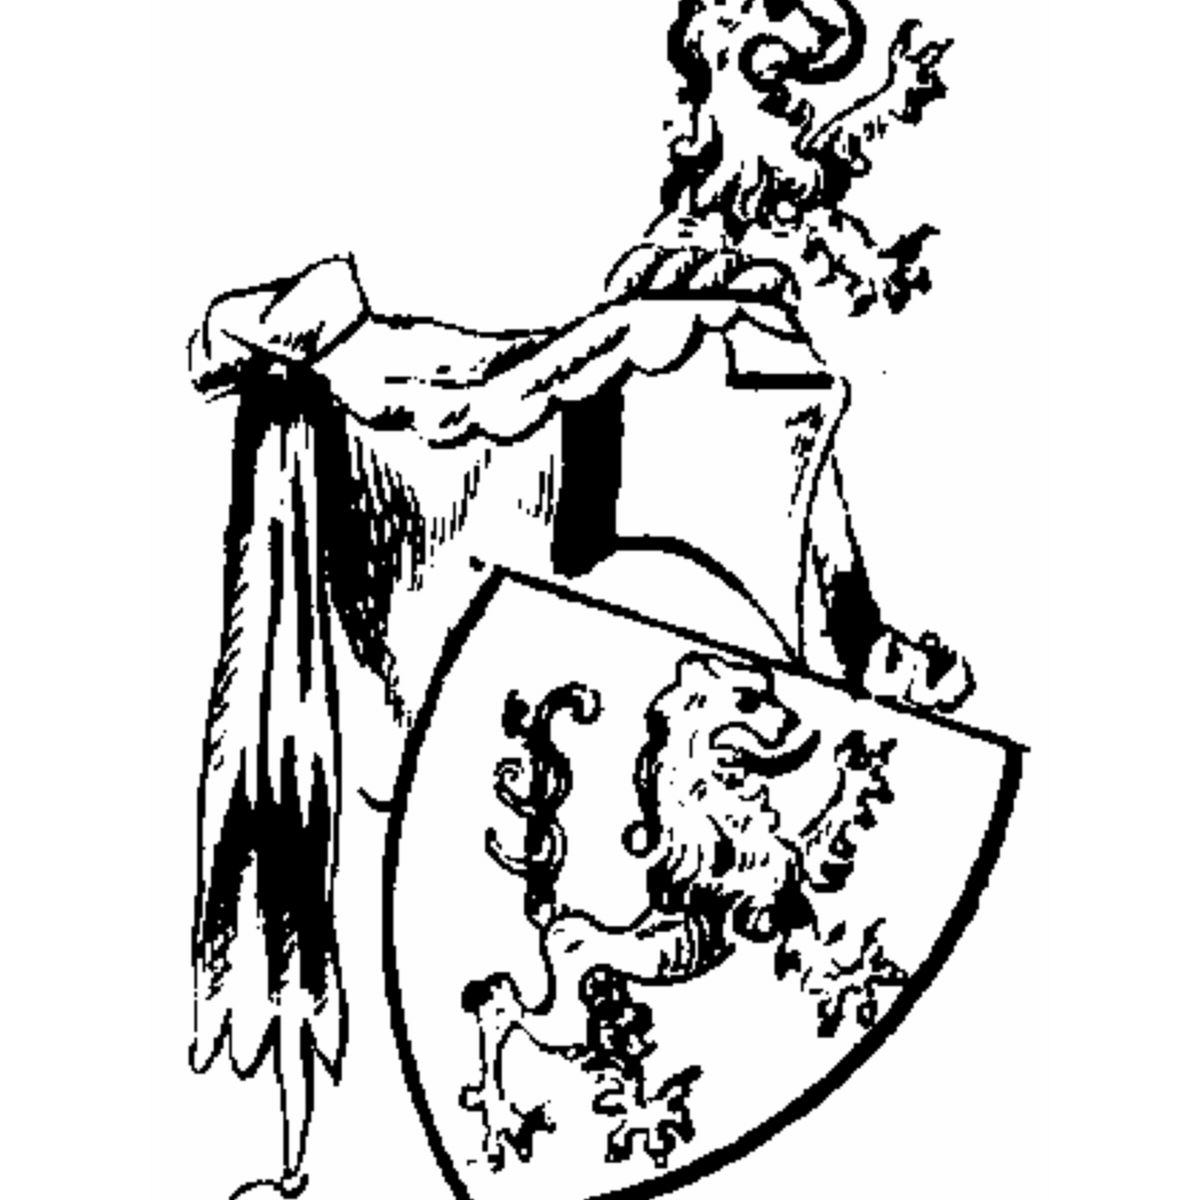 Coat of arms of family Austin